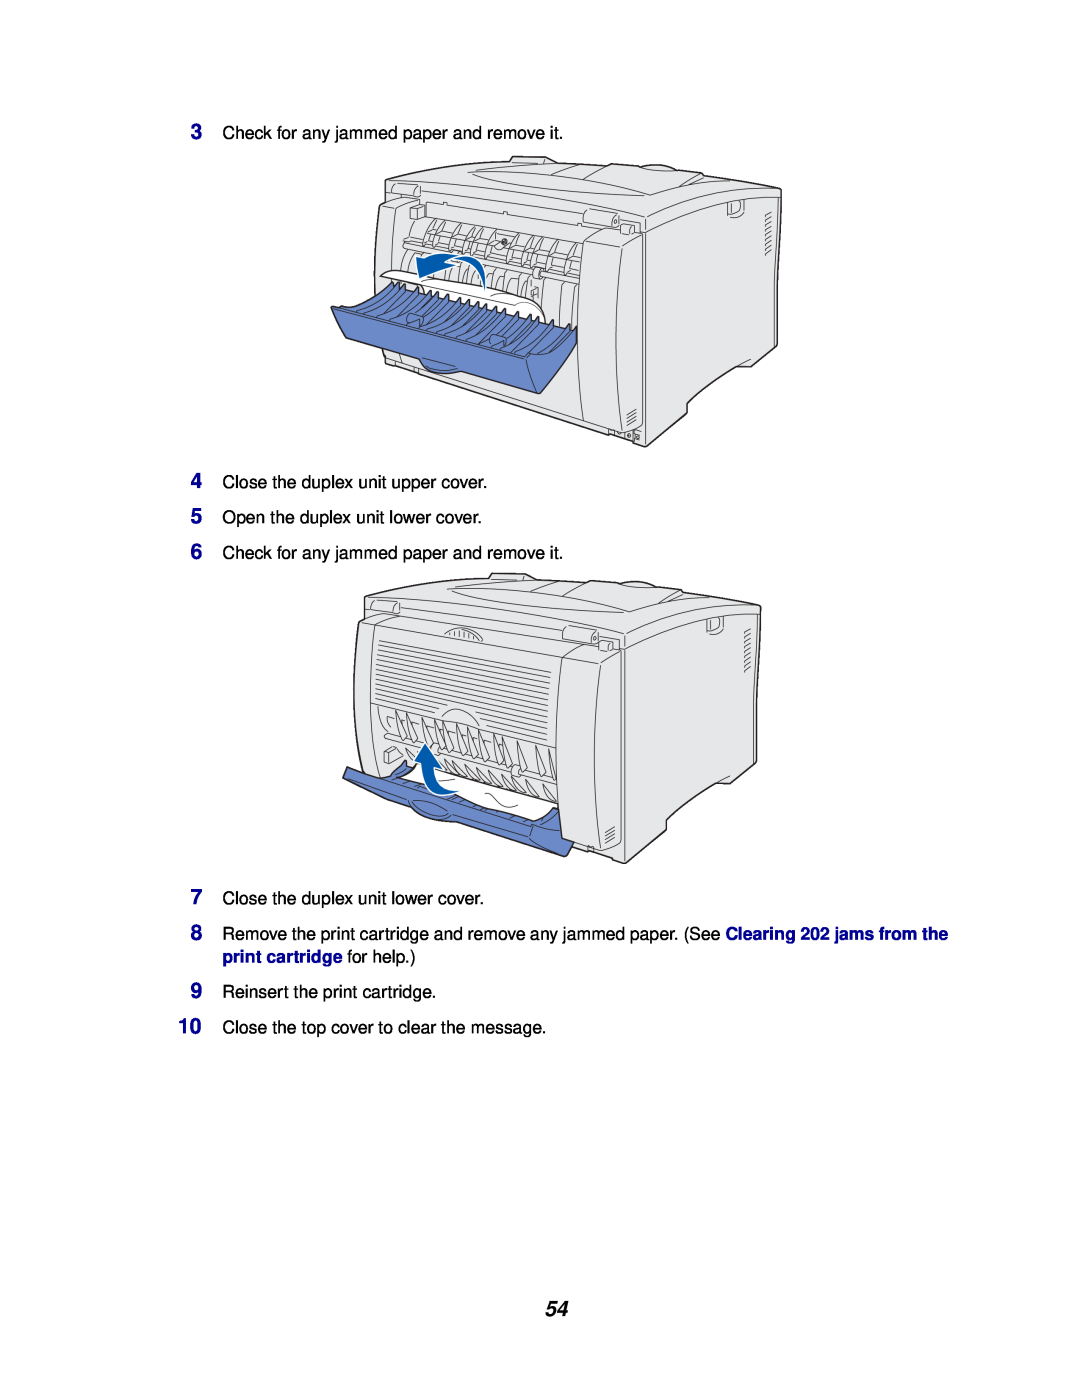 Lexmark 812 Check for any jammed paper and remove it, Close the duplex unit upper cover, Open the duplex unit lower cover 